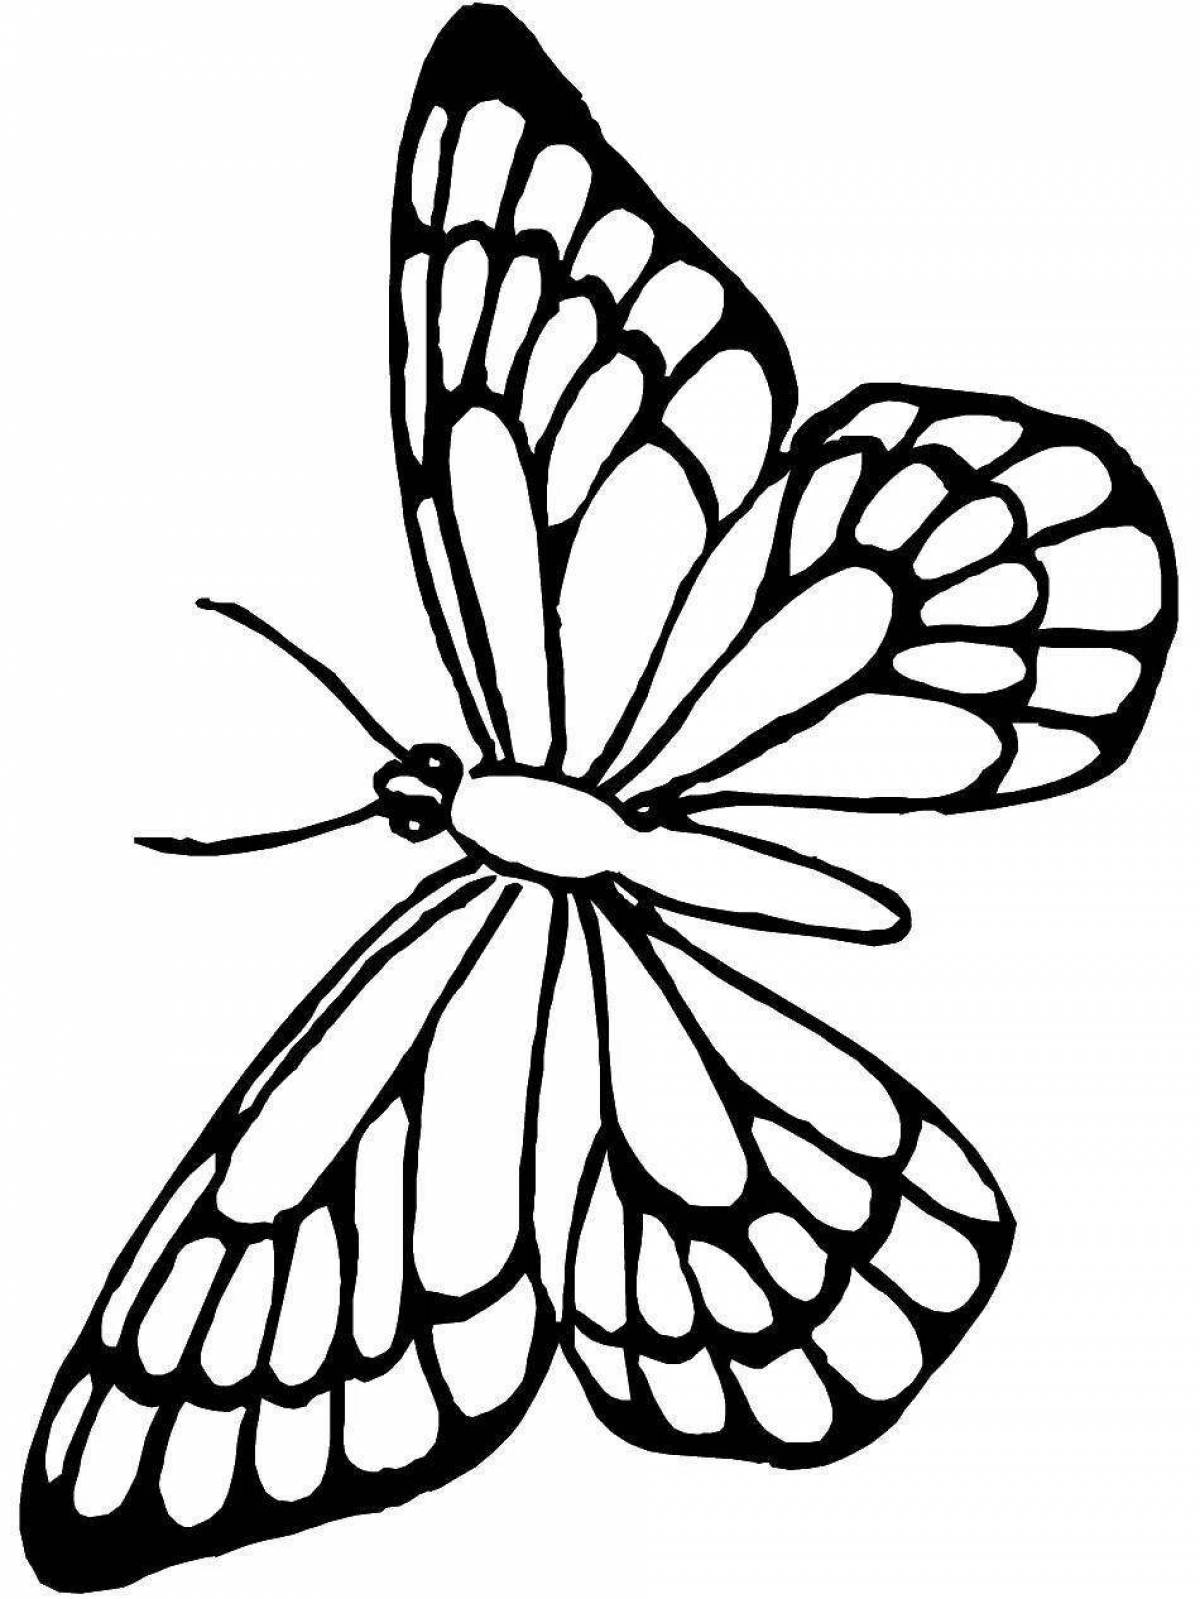 Violent butterfly stencil coloring